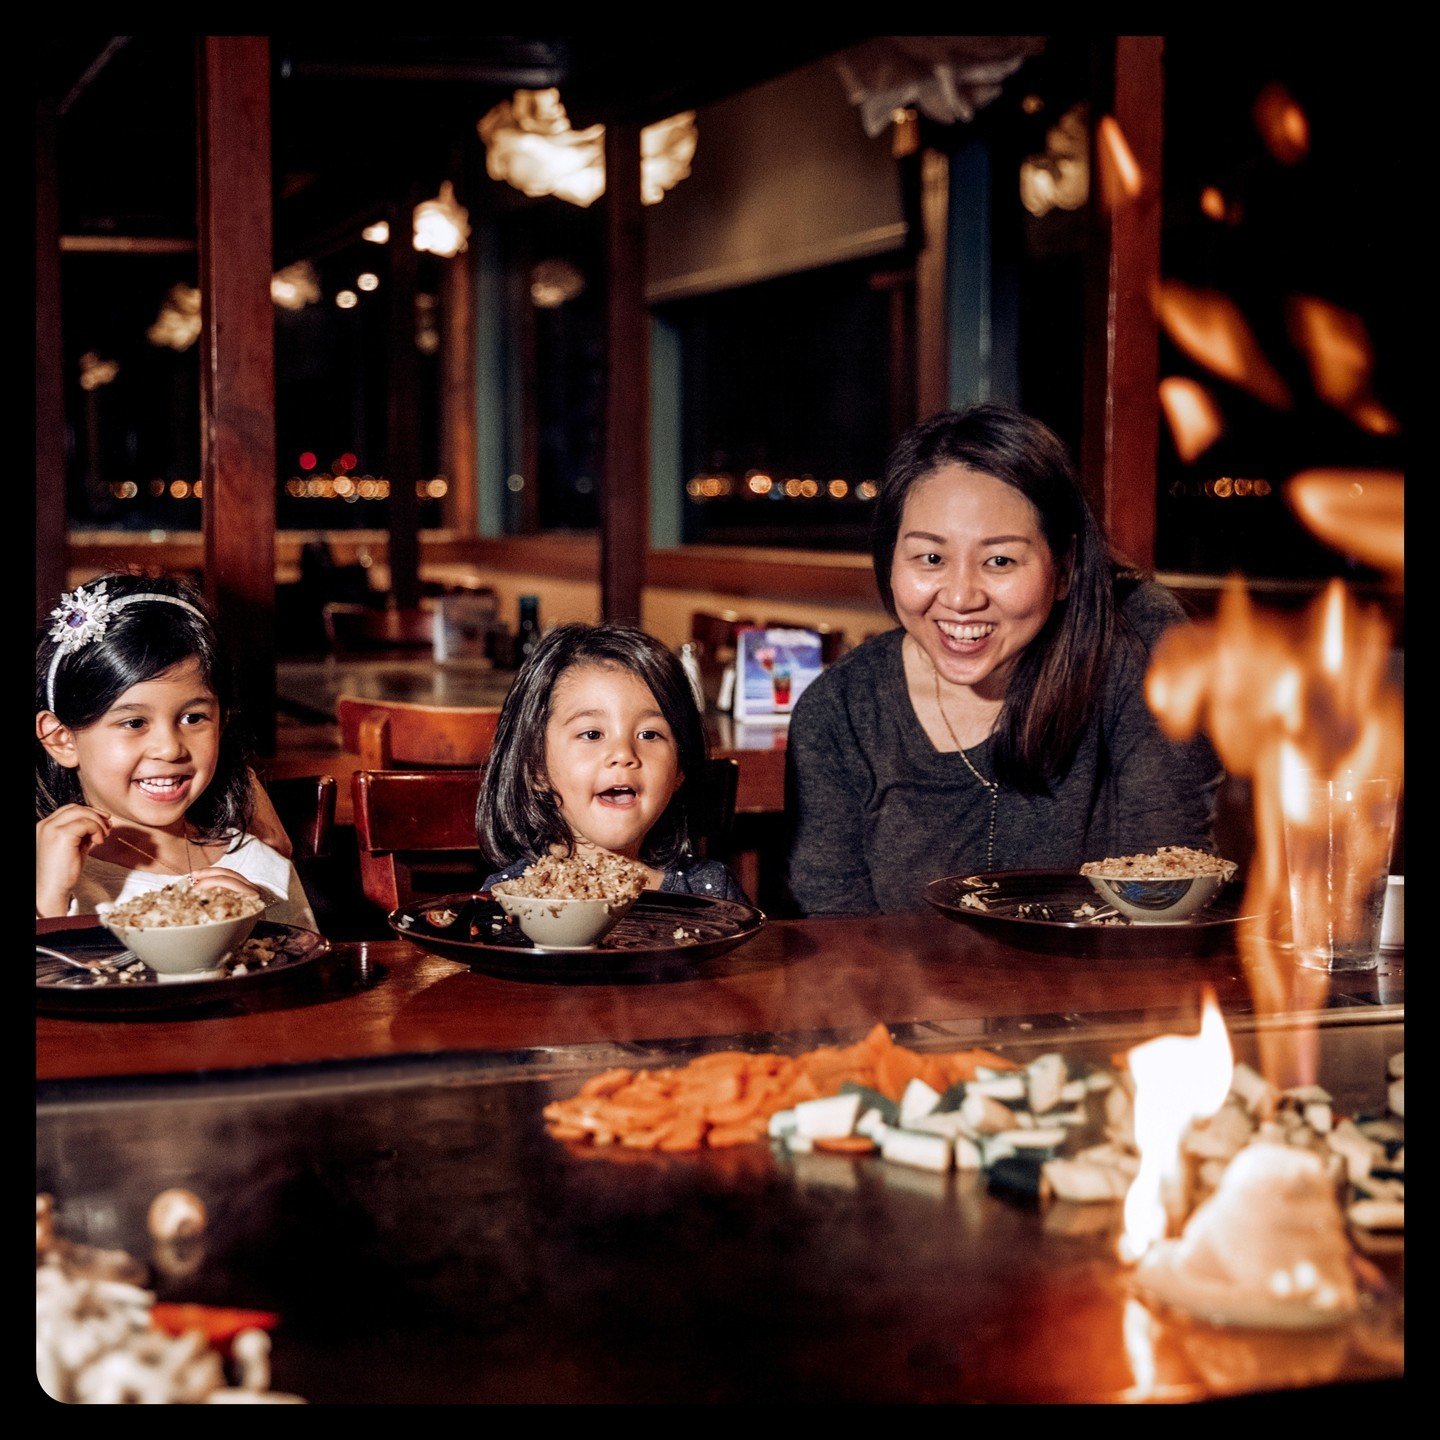 Even the little ones can enjoy big flavors at Hana Japan! Our Kids Menu features nutritious options like tender Chicken Breast, flavorful Teriyaki Steak, and succulent Jumbo Shrimp, all served with veggies and rice. It's a meal the whole family will 